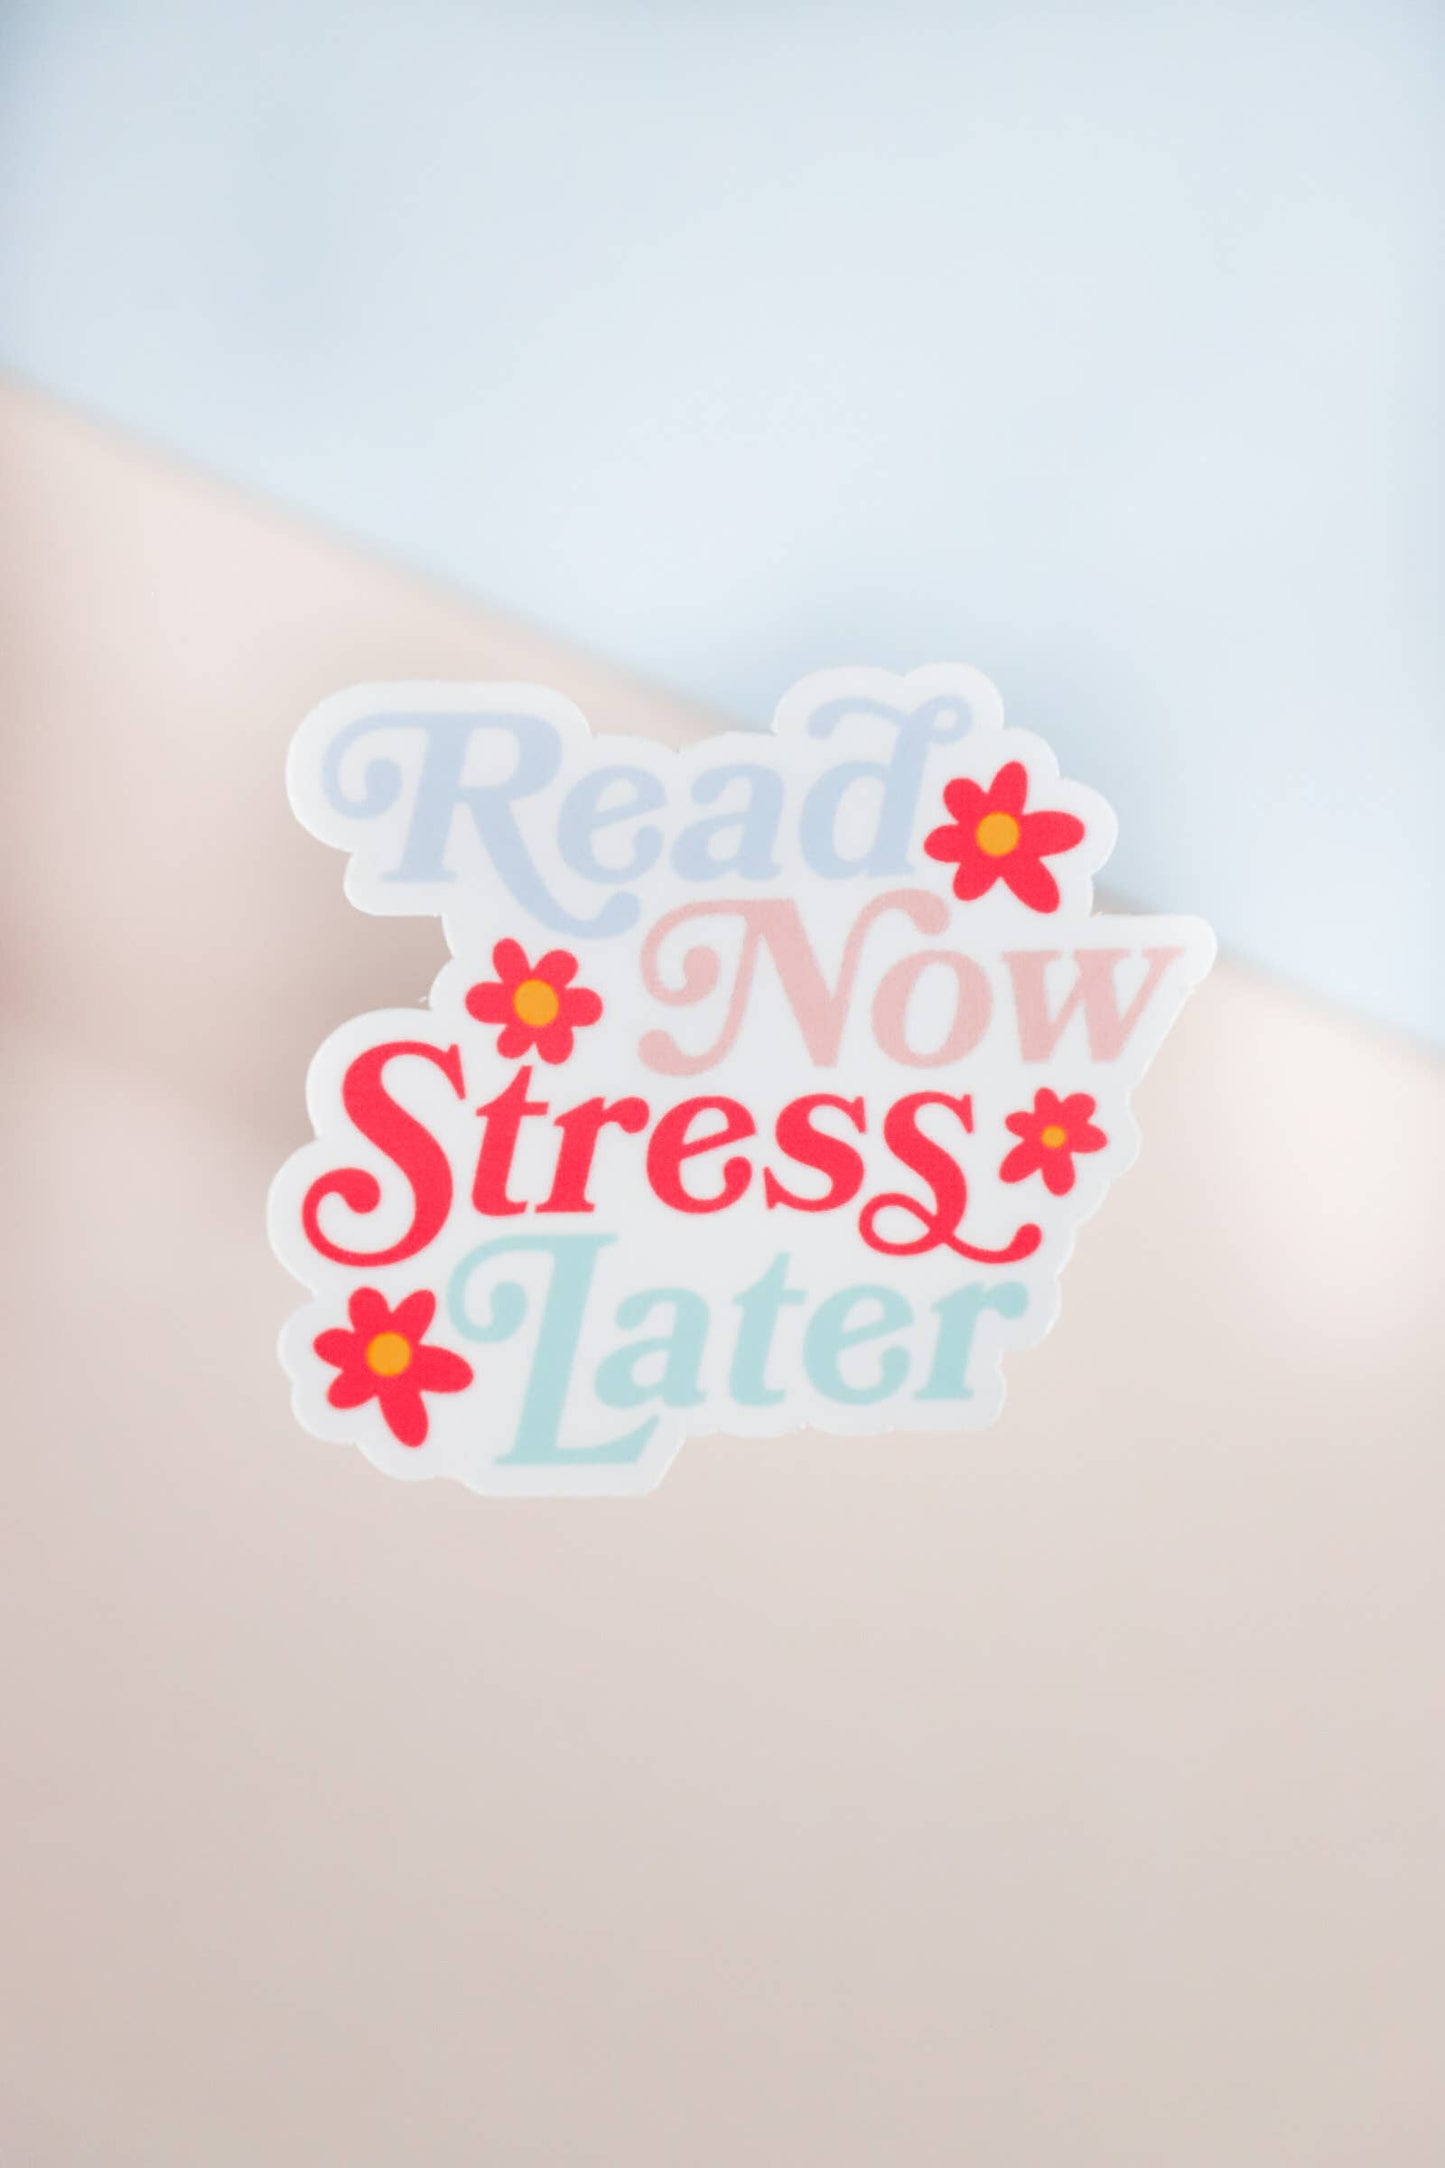 Read Now Stress Later Sticker